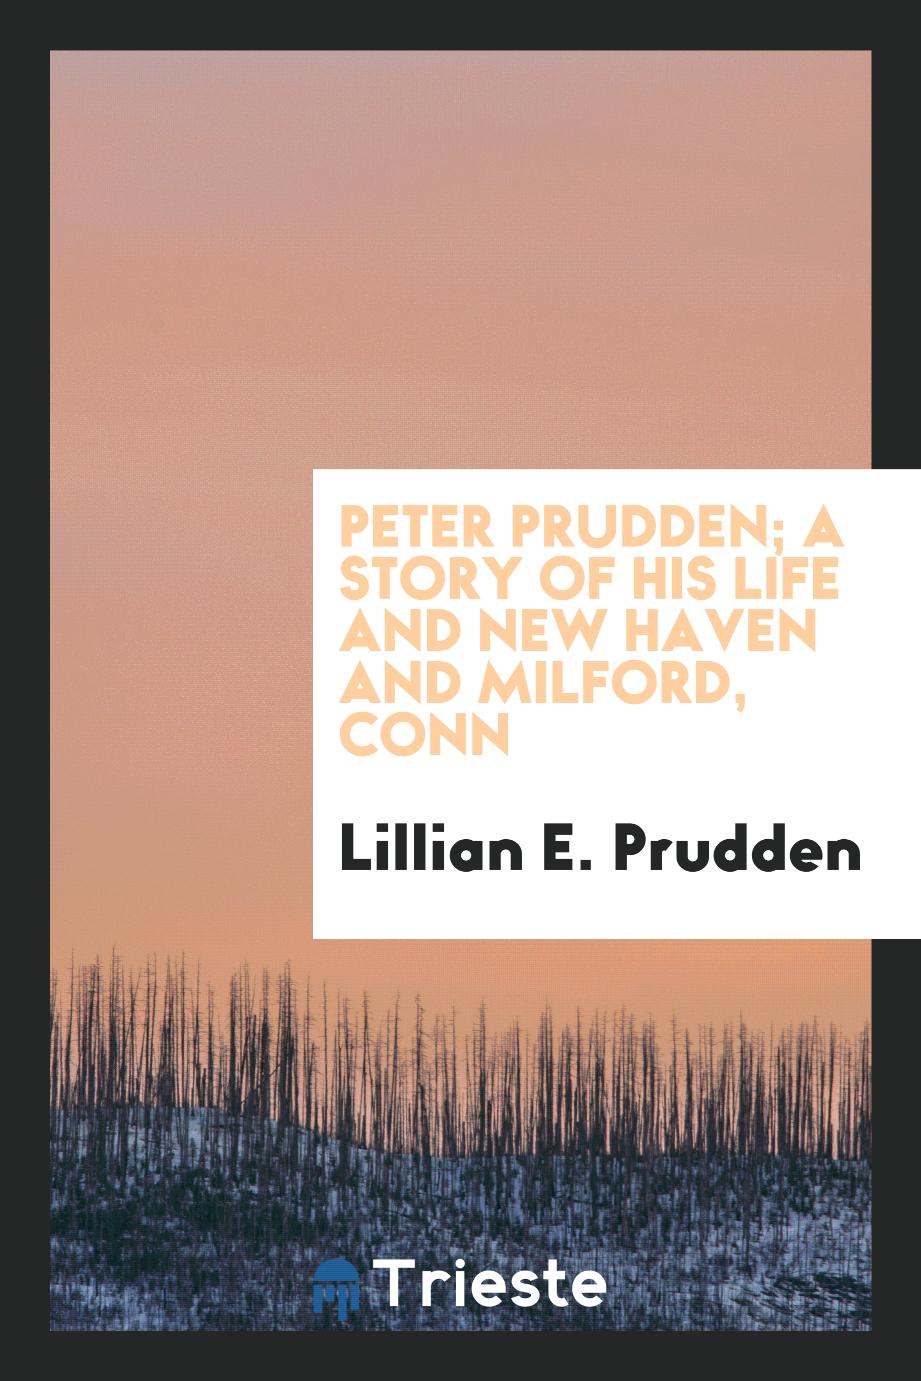 Peter Prudden; a story of his life and New Haven and Milford, Conn